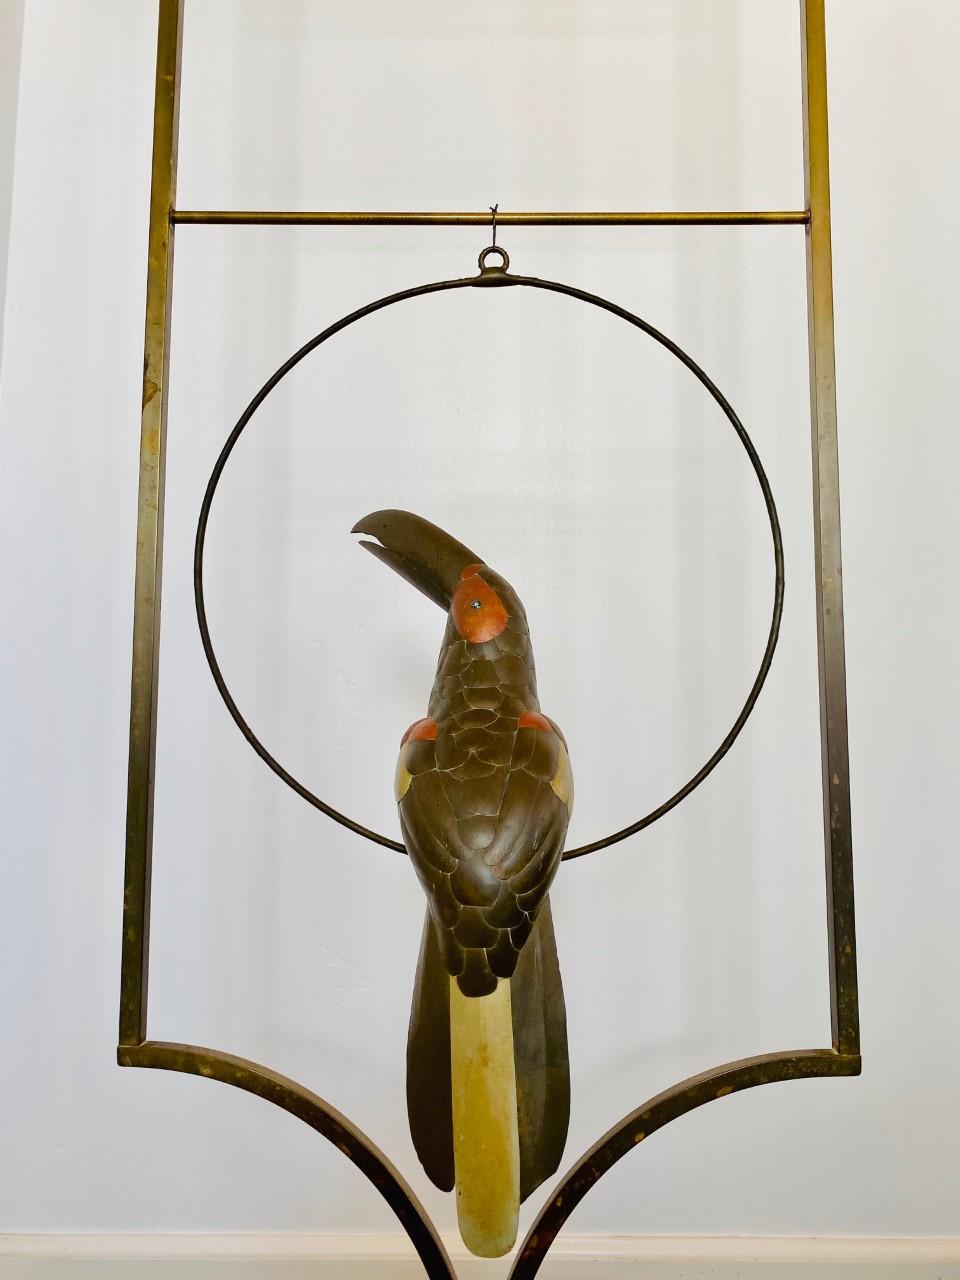 Sculptural Toucan Bird on a perch, made of mixed metals (copper, brass, nickel). This 1970s piece follows the style of Sergio Bustamante. The mix of metals adds vibrancy and depth to the form and the details on the feathering and expressions allude